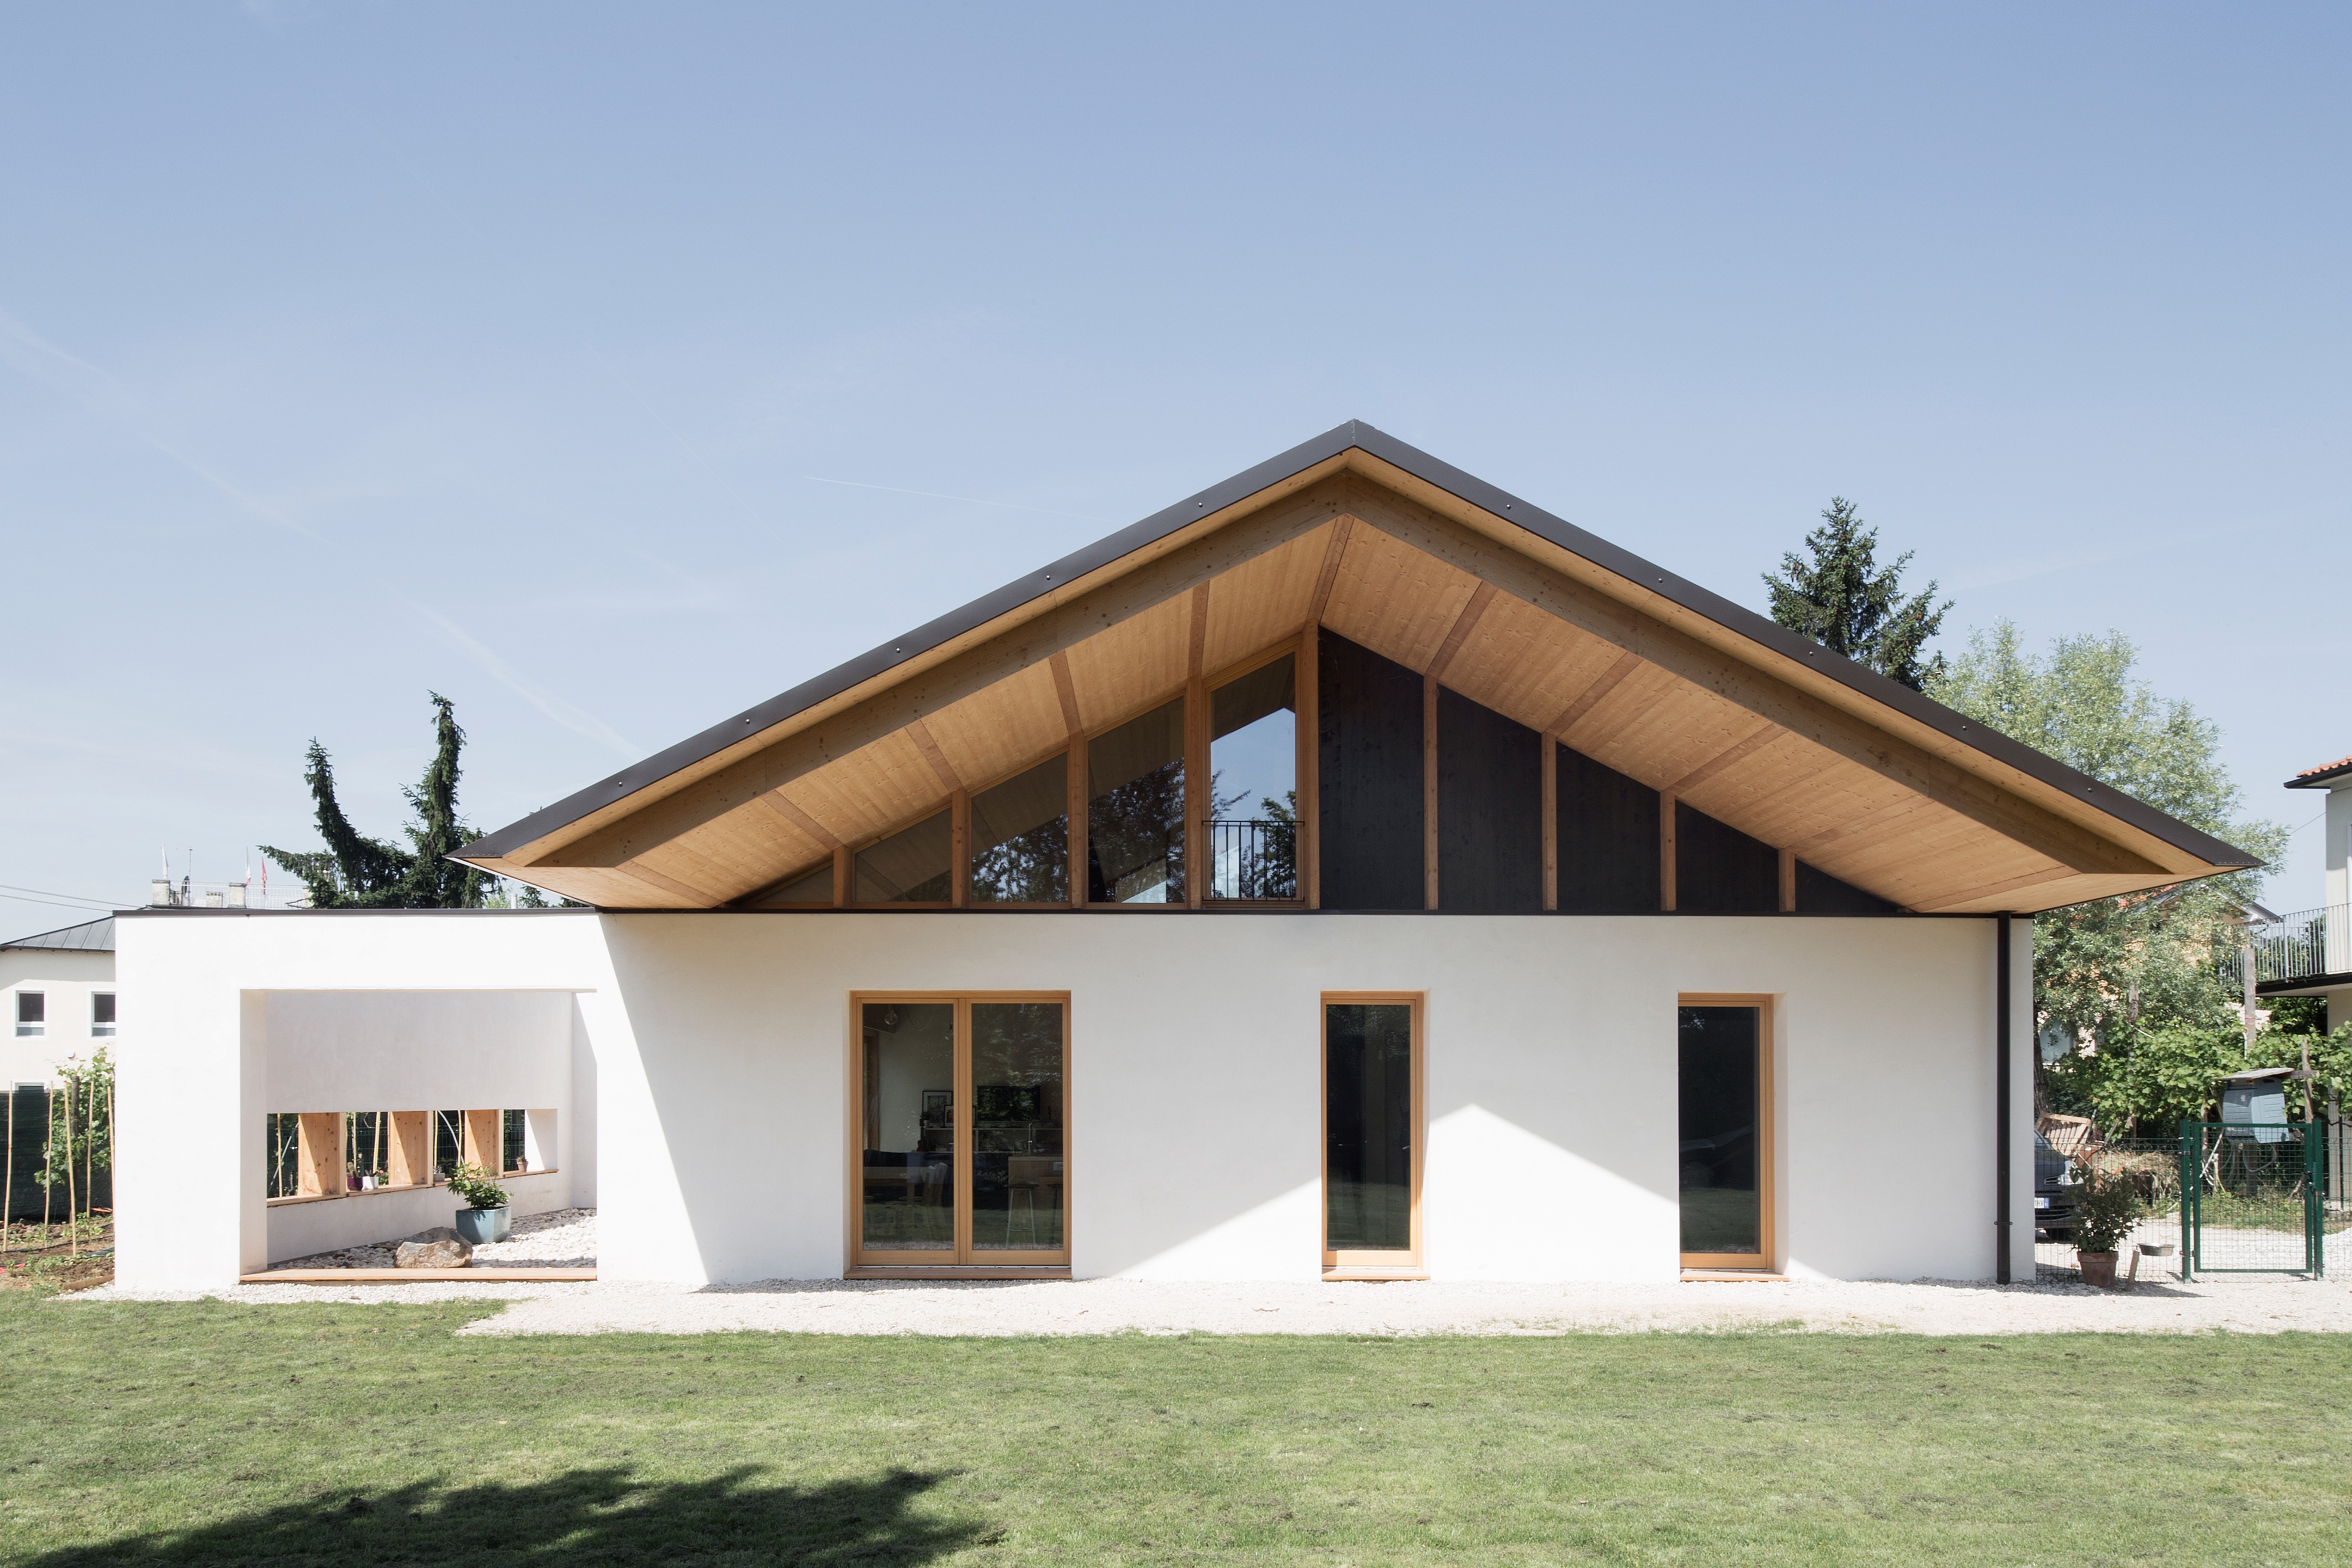 SCL Straw-Bale House in Vicenza, Italy by Jimmi Pianezzola